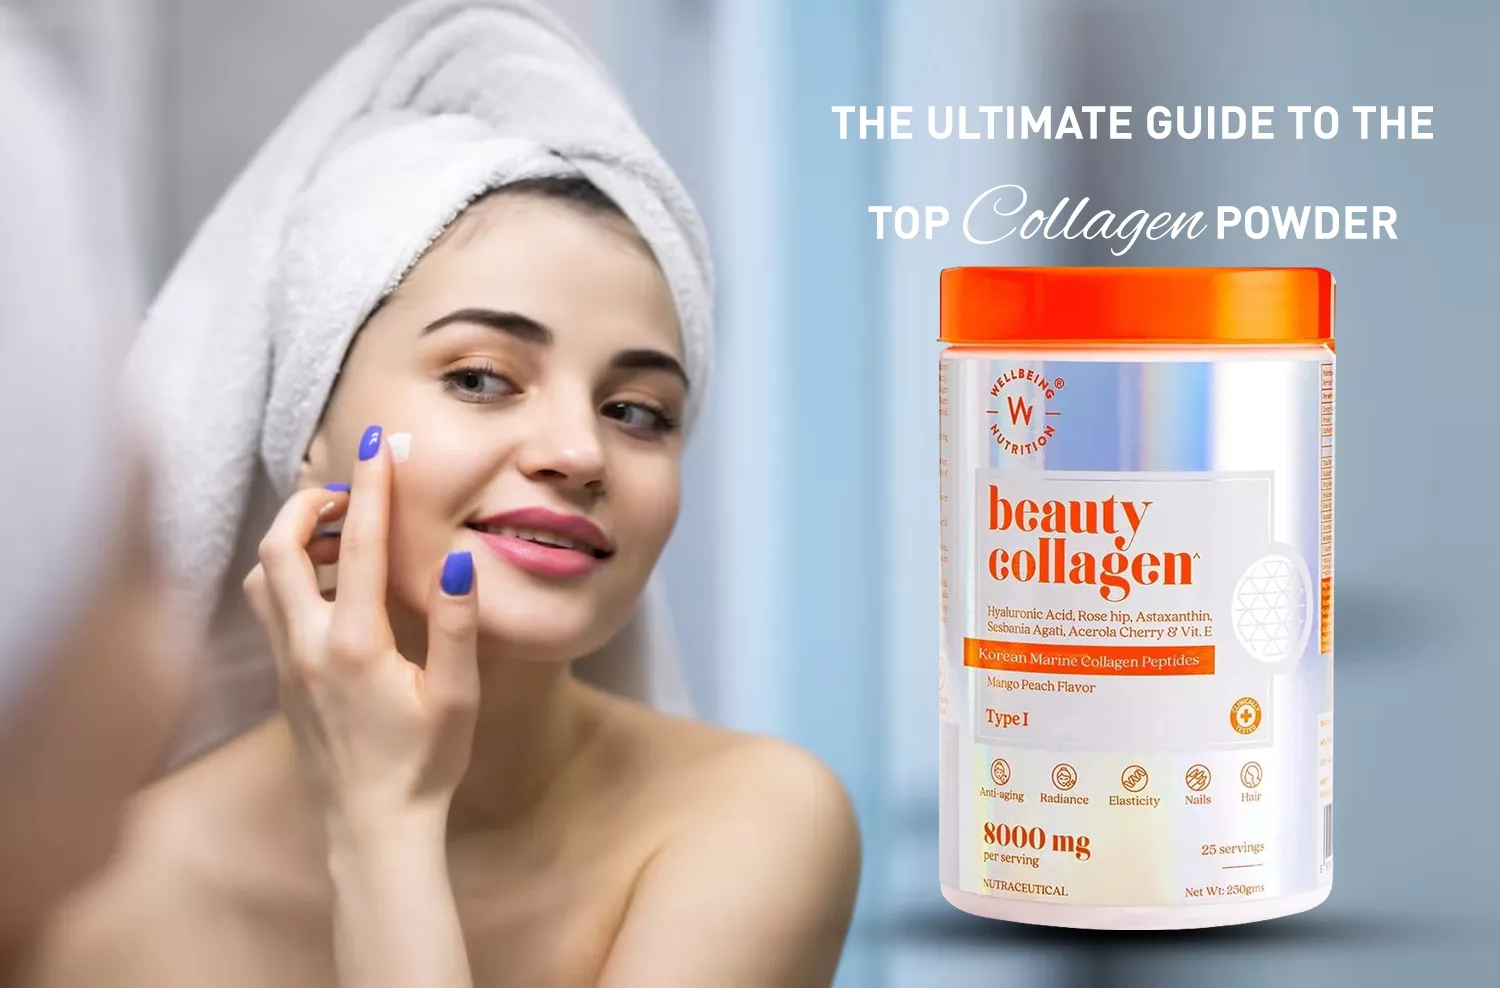 Why Wellbeing Nutrition's Beauty Collagen Powder Dominates the Indian Market